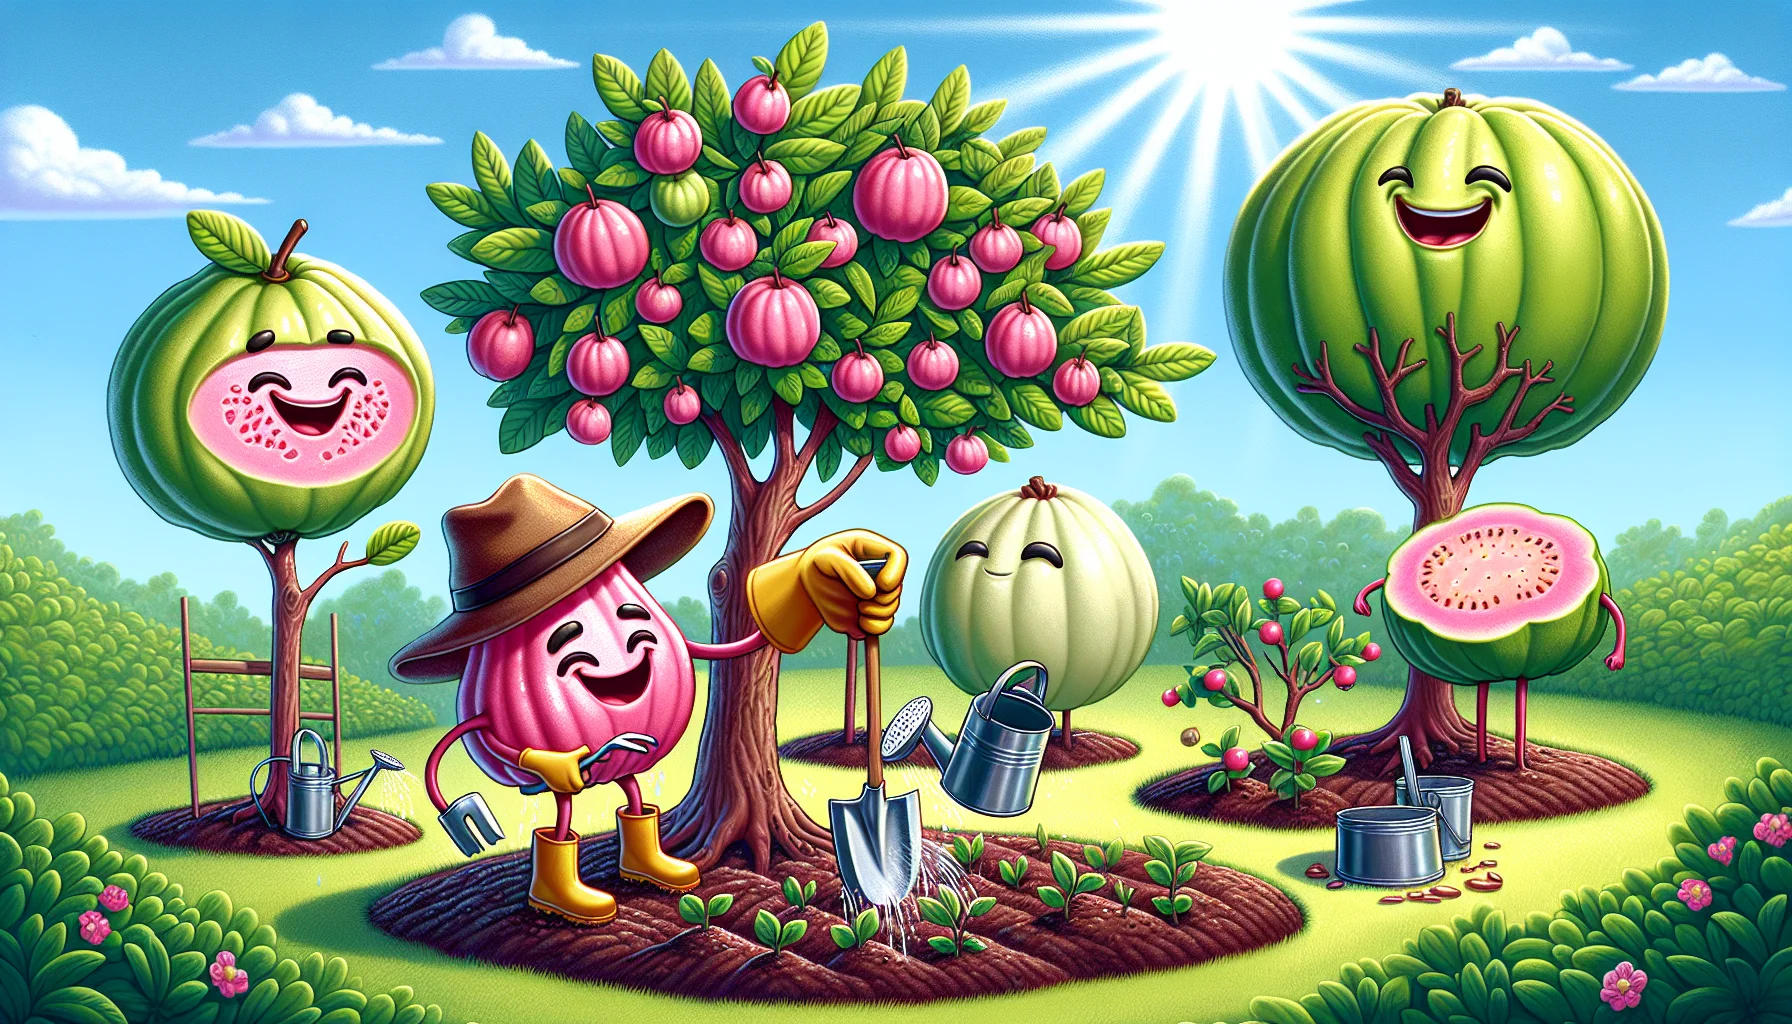 Imagine a humorous gardening scene under bright sunlight. Various types of guava trees are abundantly bearing fruit. The Pink Guava, White Guava, and Thai Maroon Guava are all present, each showing off their distinctive colors and shapes. They have been anthropomorphized: the Pink Guava is wearing an old fashioned gardener's hat and gloves, planting a new tree with a tiny shovel. The Thai Maroon Guava is holding a watering can, sprinkling water on seedlings. And the White Guava, with a pair of pruning shears, is carefully trimming a bush into the shape of a guava. They all have faces with exaggeratedly happy expressions, encouraging the viewers towards the joy of gardening.